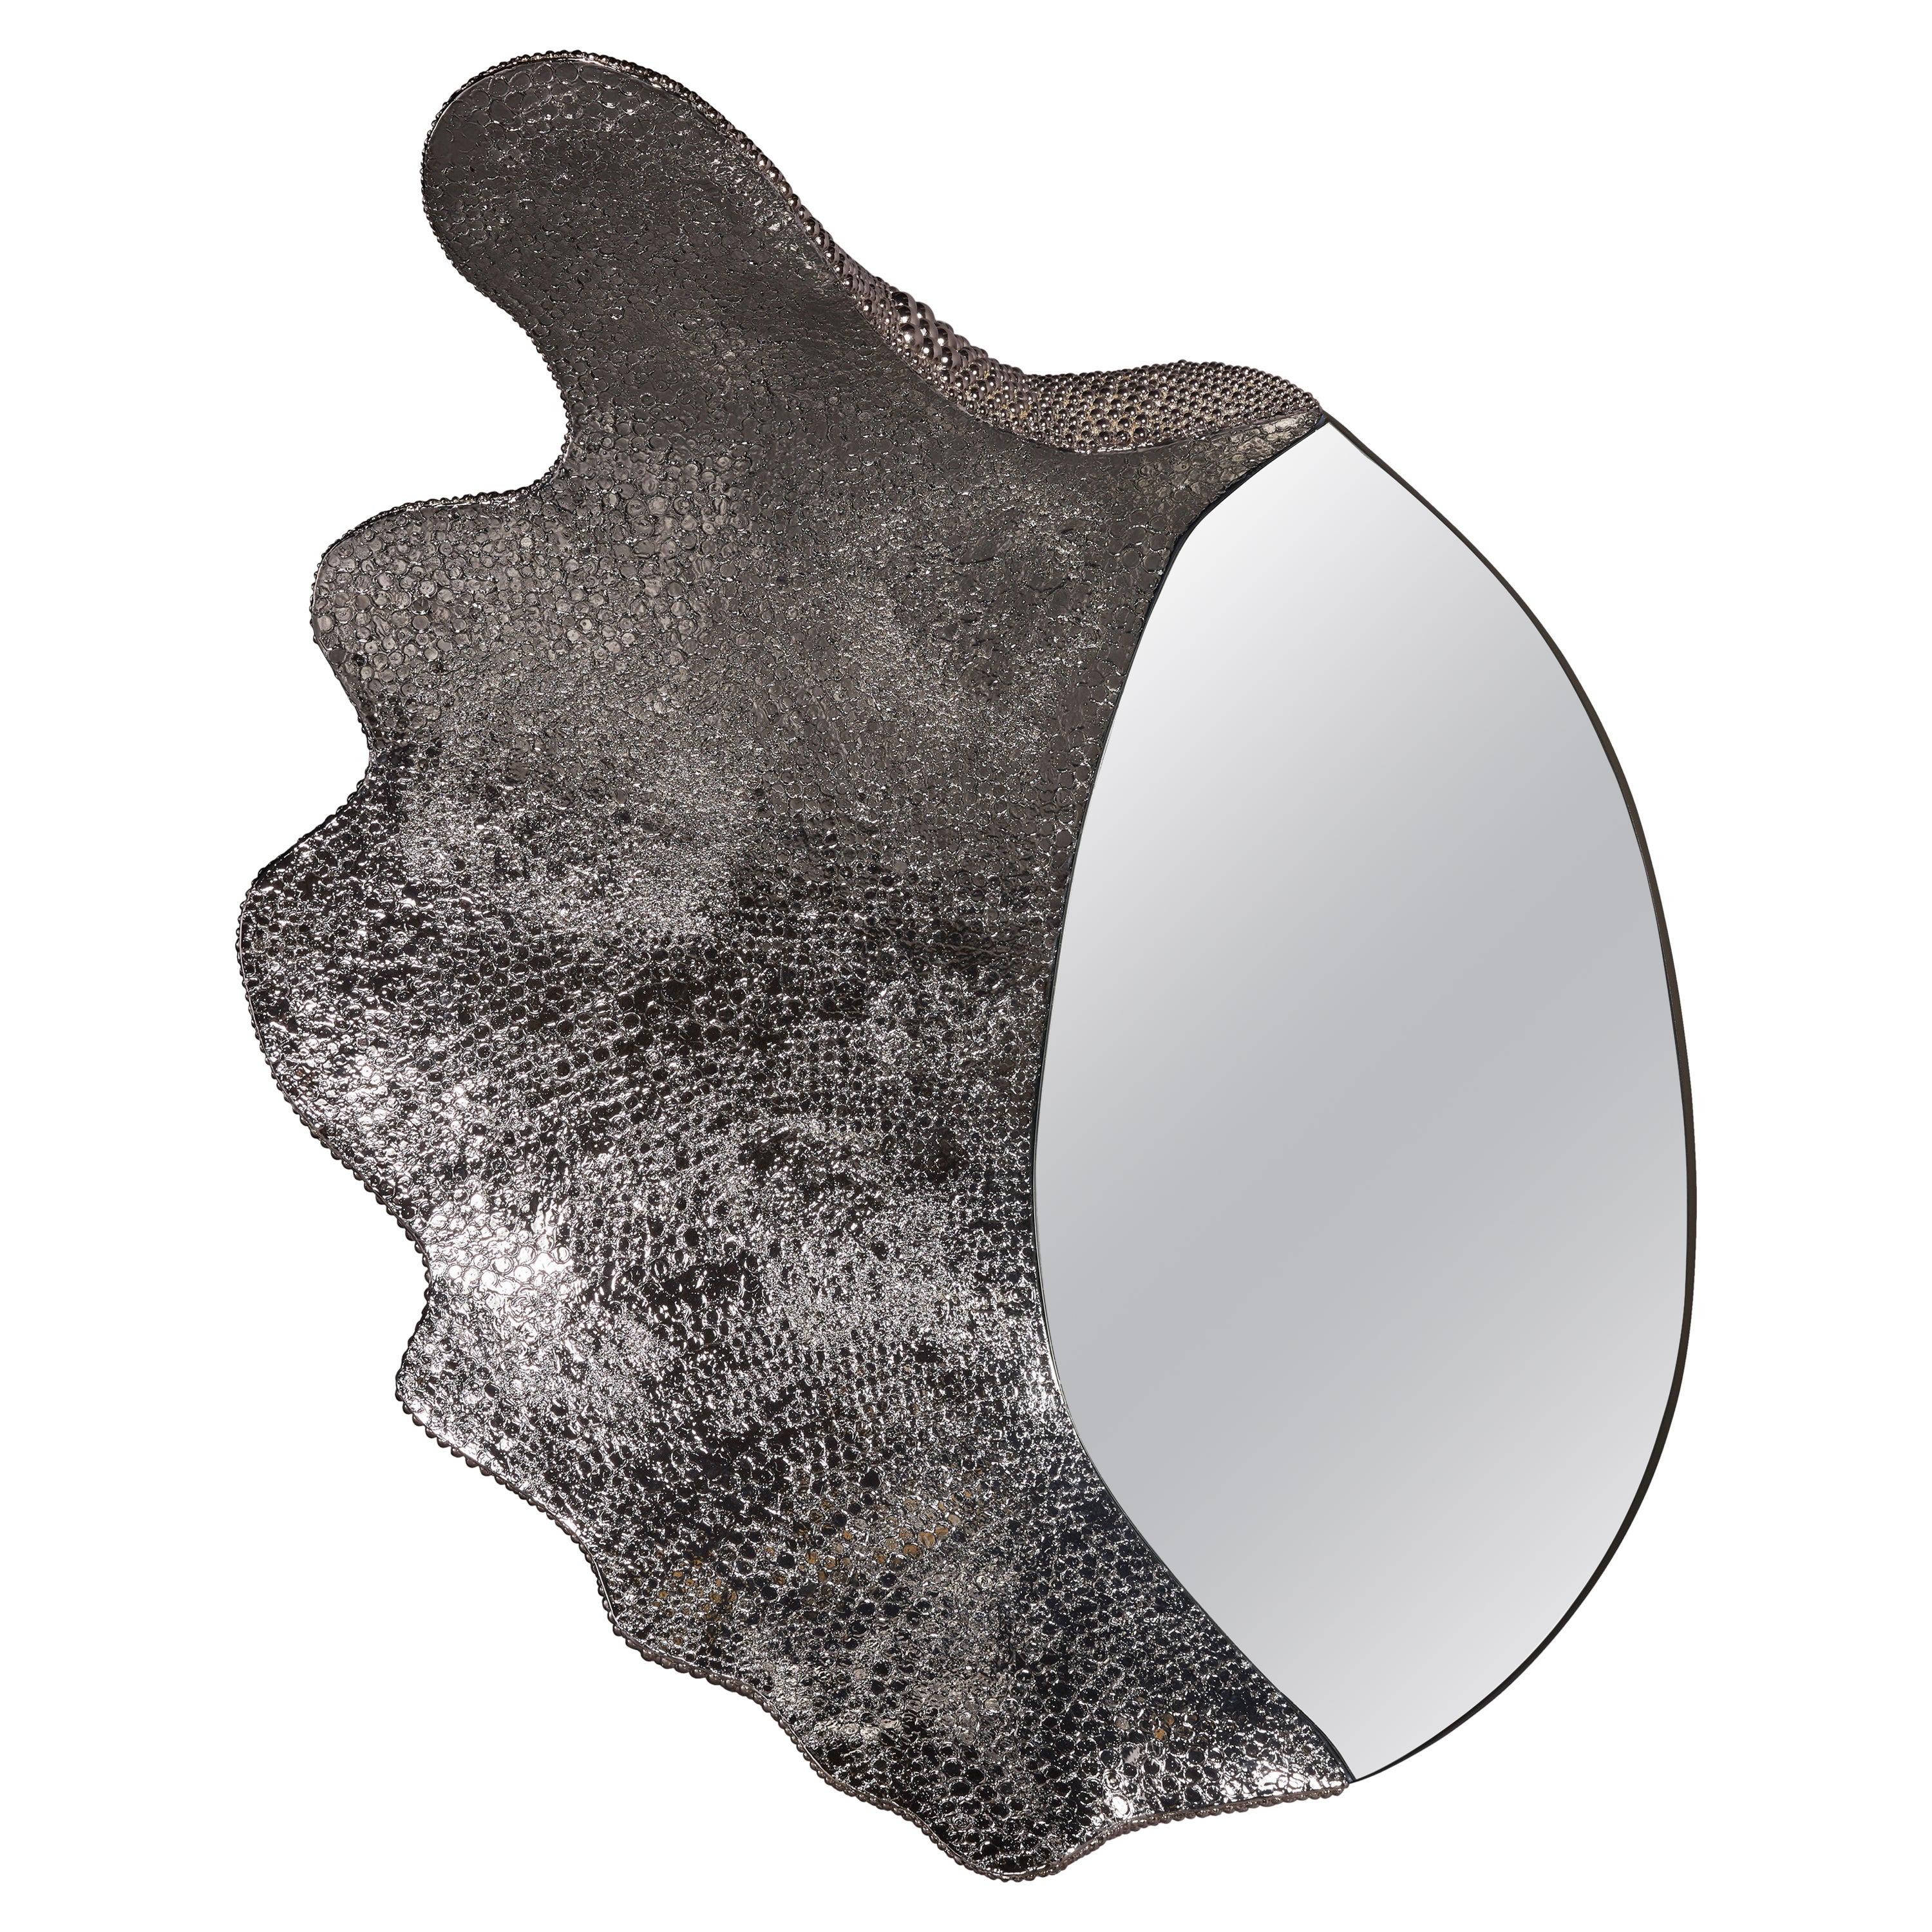 'Stardust' Wall Mirror by Pia Maria Raeder